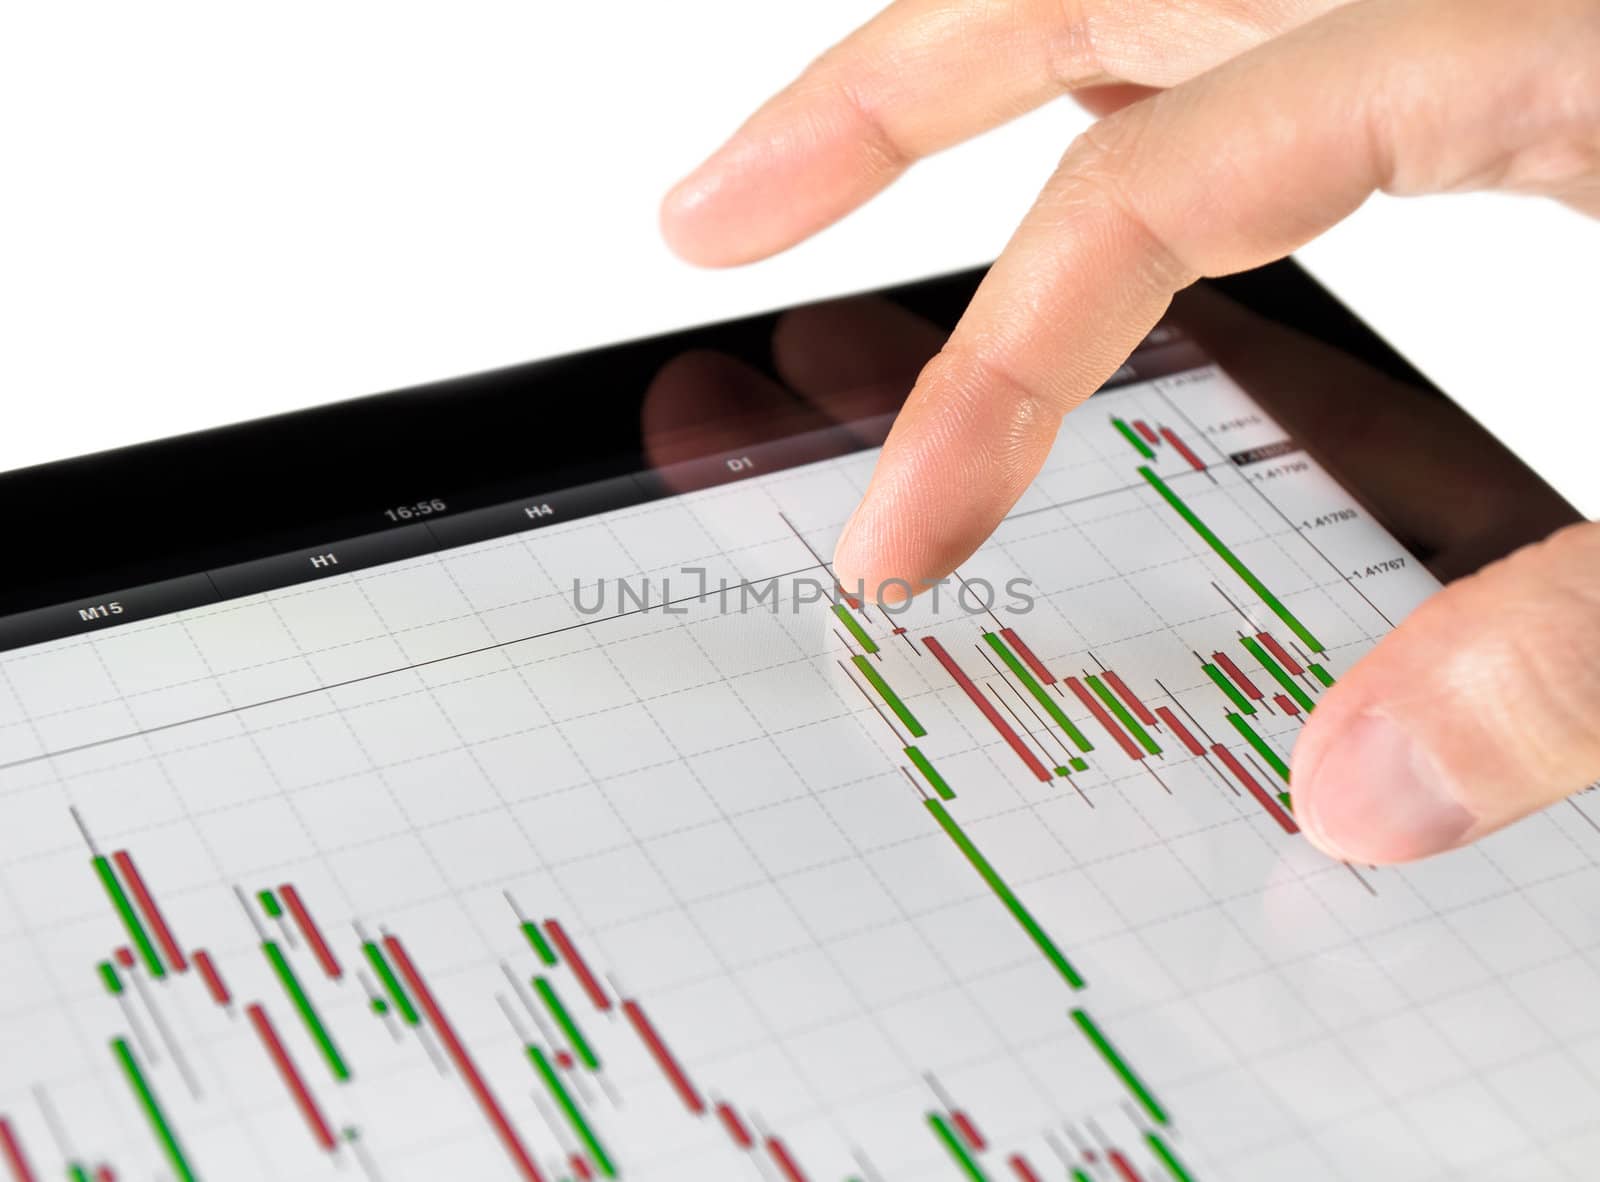 Using touch screen tablet for analyzing stock market chart.